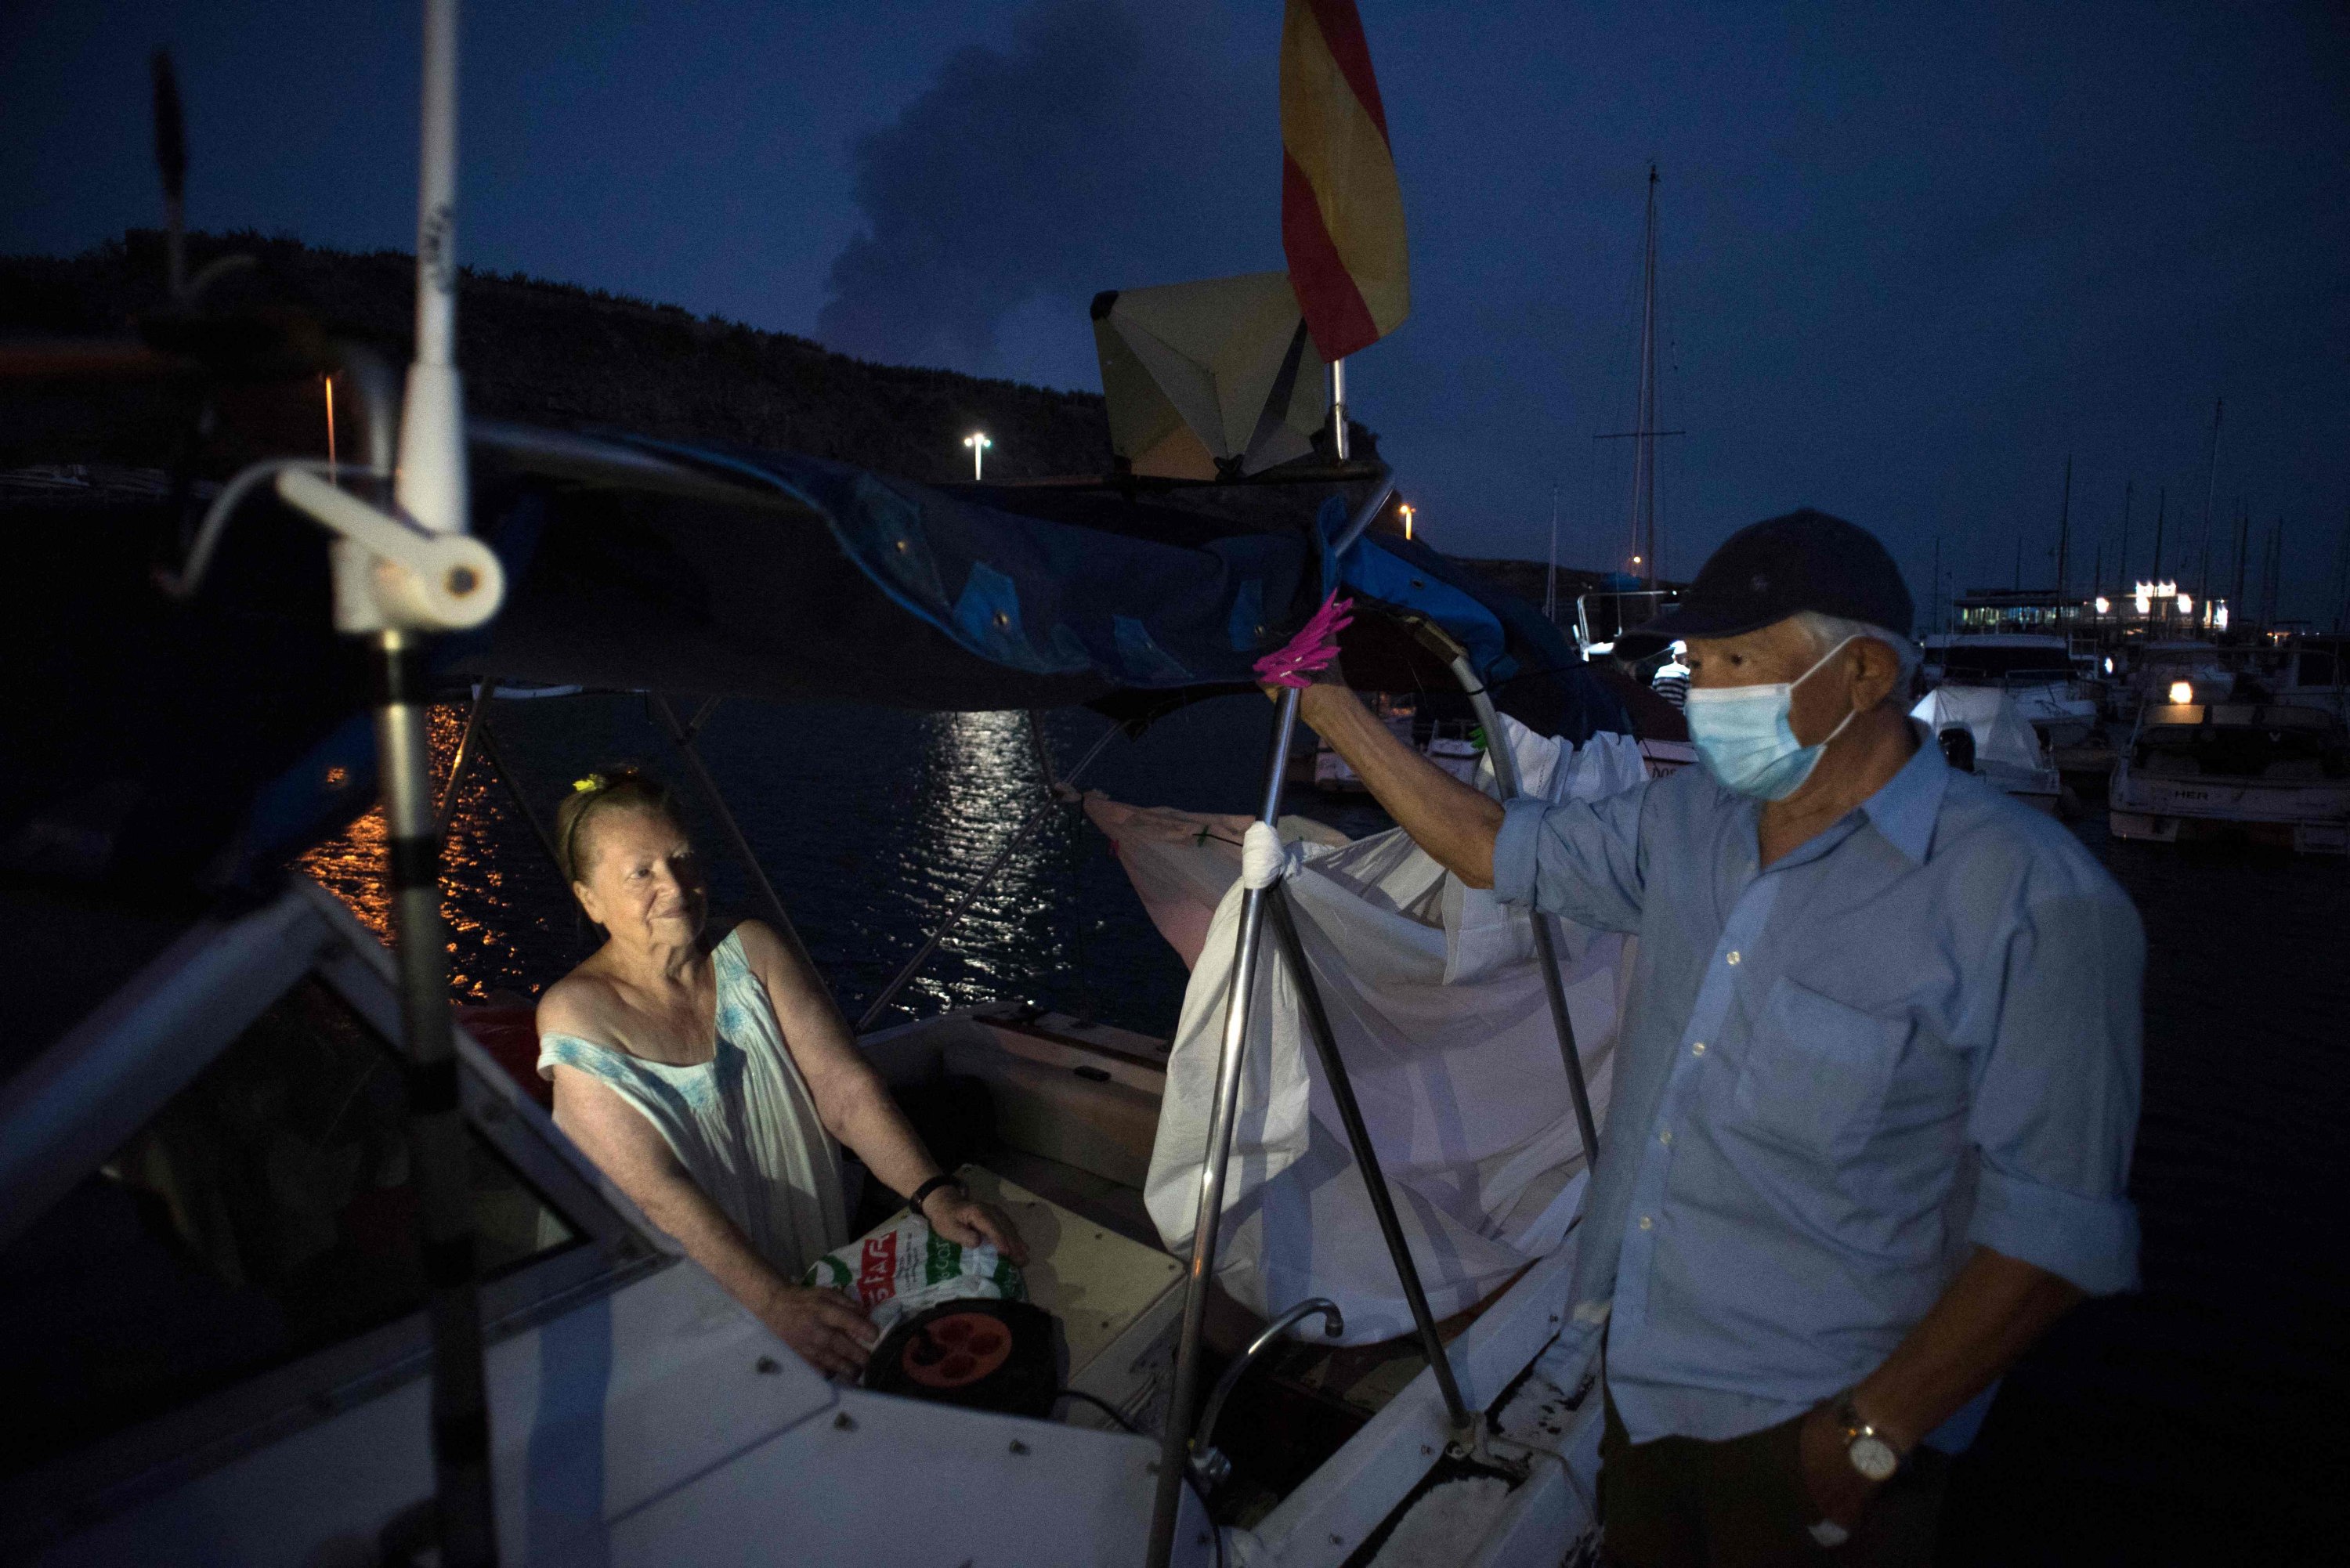 Margaretha and Luis, 80 and 90 years old, wait on their boat where they have settled after fleeing their home after the eruption of the Cumbre Vieja volcano, in the port of Tazacorte, on La Palma, Spain, Oct. 3, 2021. (AFP Photo)